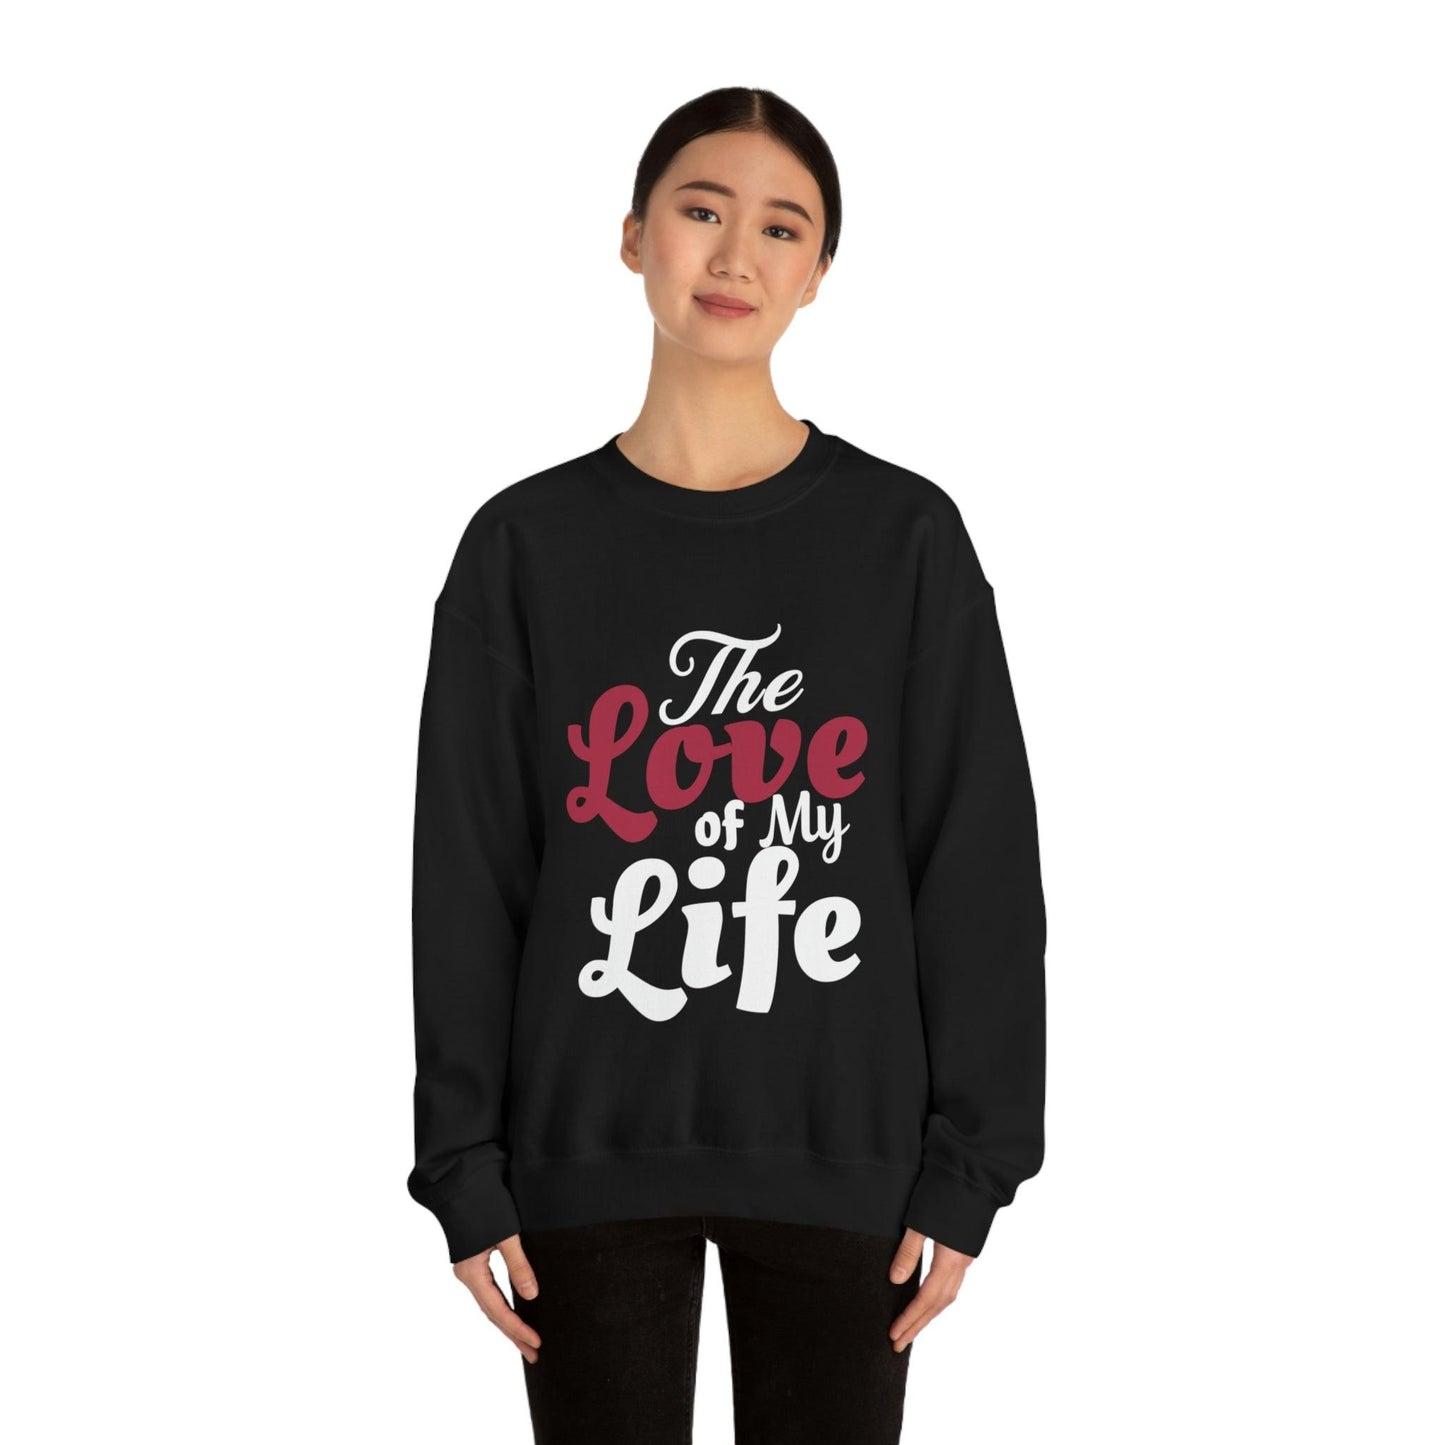 Love Sweatshirt, Love Shirt, Gift For Fiance, Newlywed Gift, Gift For Wife, Engagement Shirt,The Love of My Life, Valentine's day gift